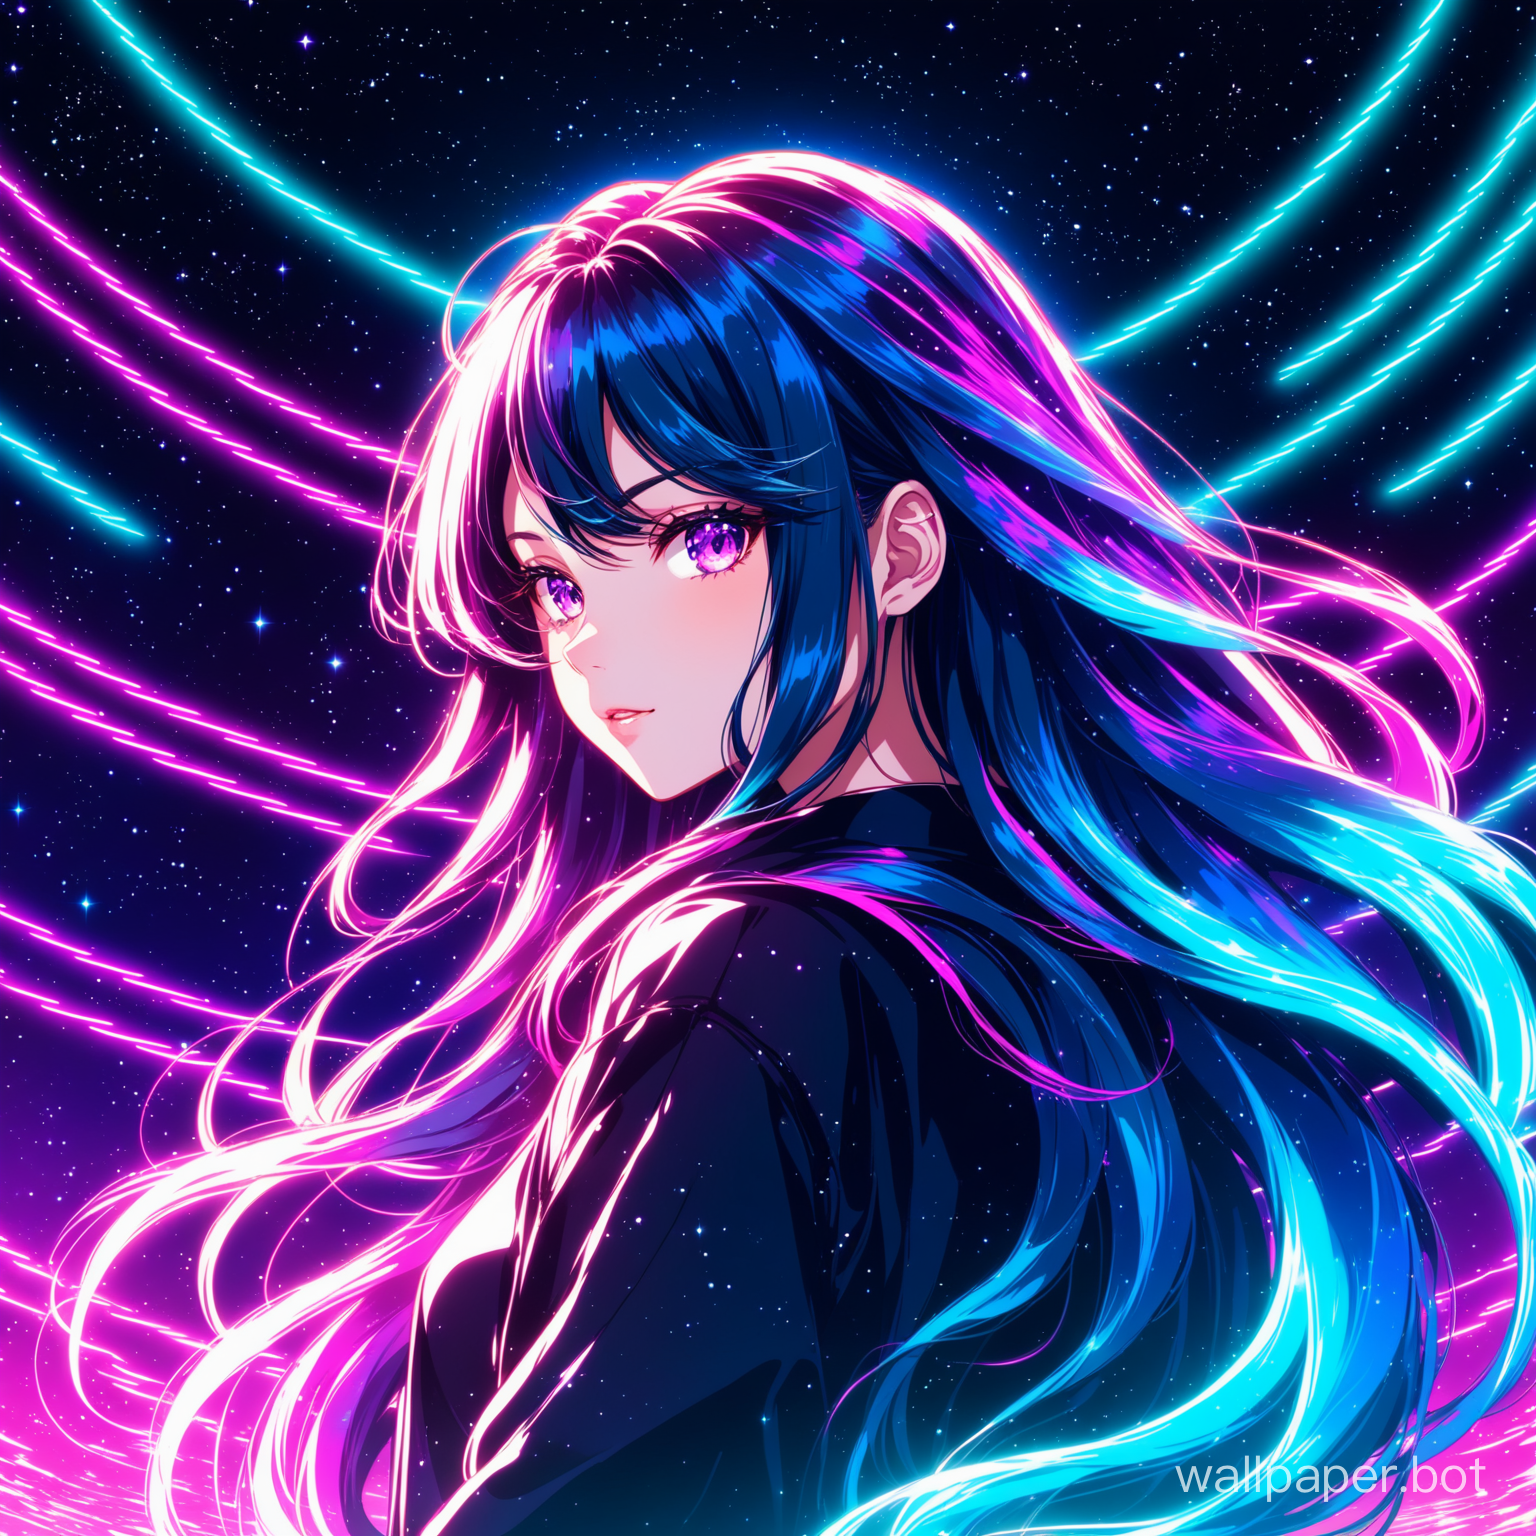 "Cool girl with long hair, neon lights, glowing waves, anime style, universe hairstyle, digital art"